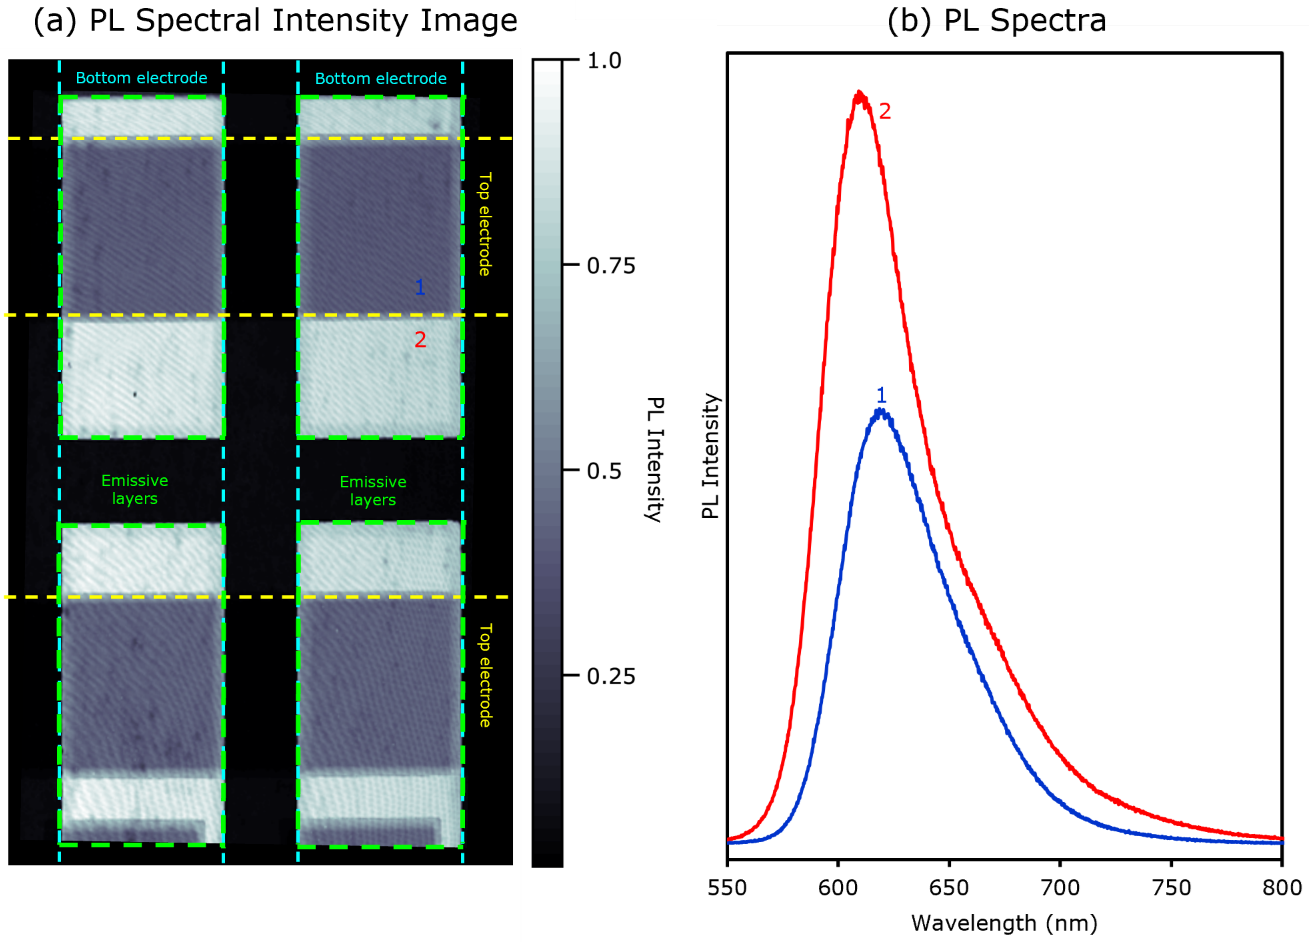 (a) Spectral PL image of OLED device. (b) PL spectra from points 1 and 2 labelled in the image in (a)